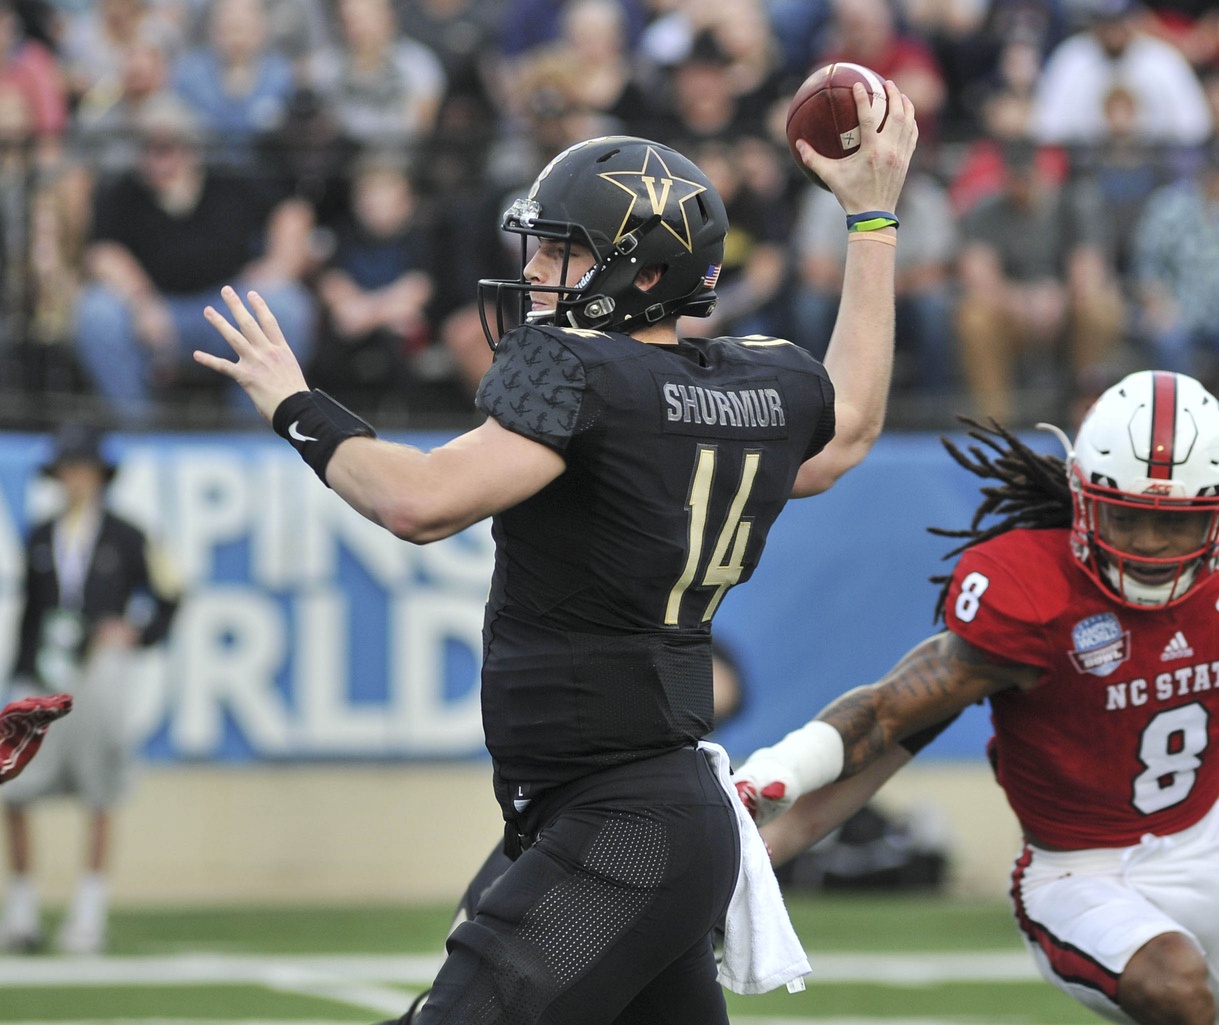 Dec 26, 2016; Shreveport, LA, USA; Vanderbilt Commodores quarterback Kyle Shurmur (14) attempts to pass the ball while being pressured by North Carolina State Wolfpack defensive back Dravious Wright (8) during the first halfi at Independence Stadium. Mandatory Credit: Justin Ford-USA TODAY Sports